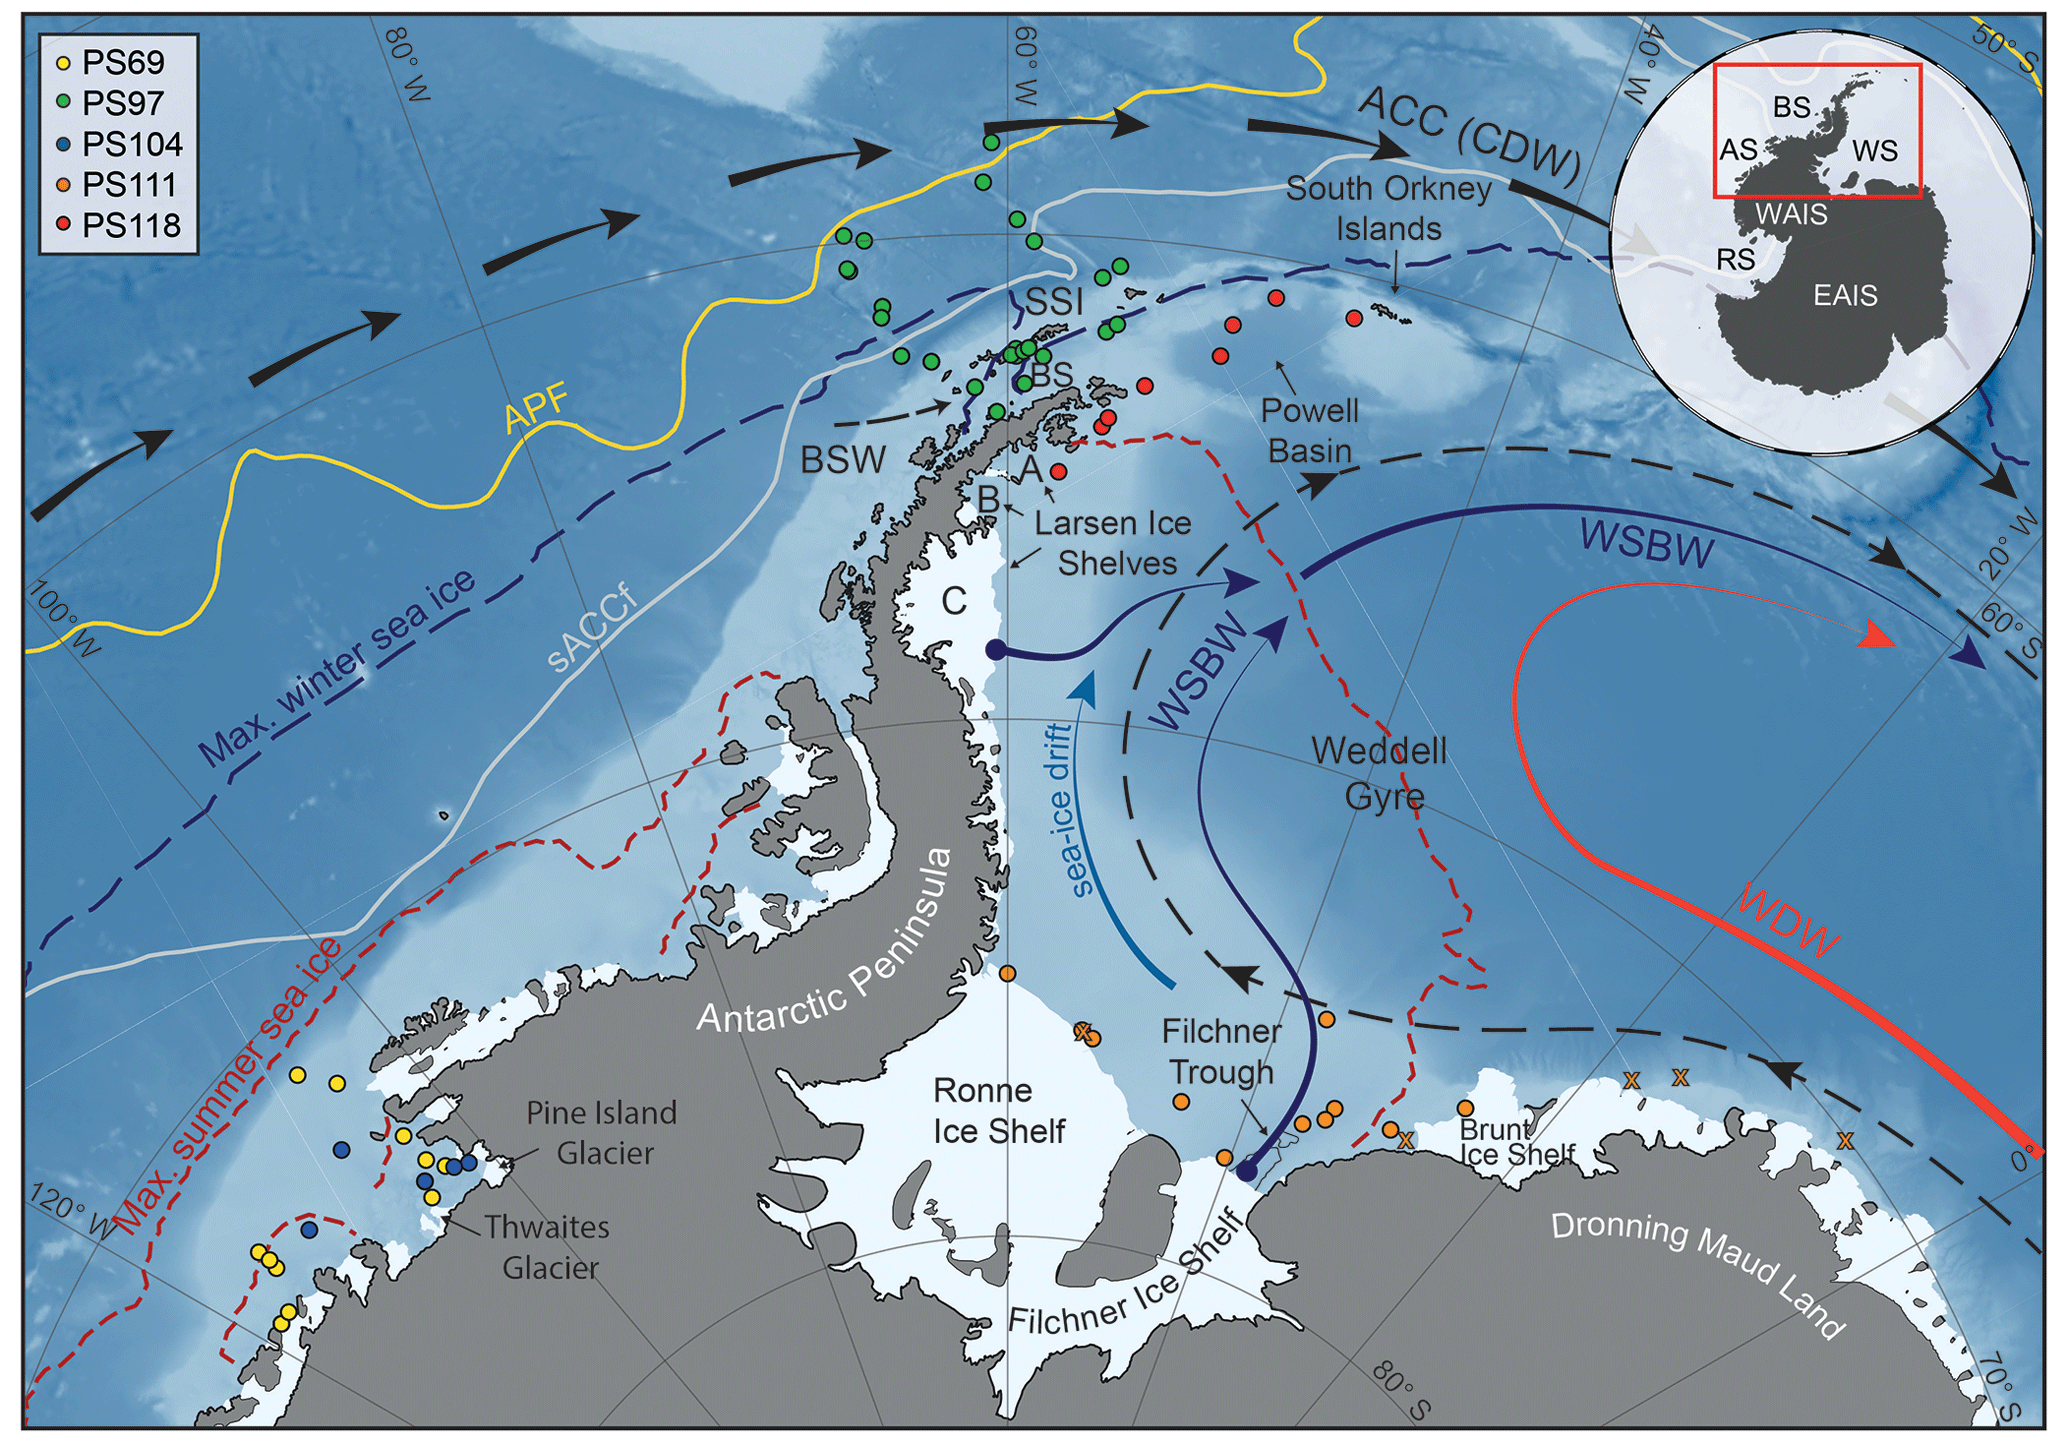 CP - Evaluation of lipid biomarkers as proxies for sea ice and ocean  temperatures along the Antarctic continental margin